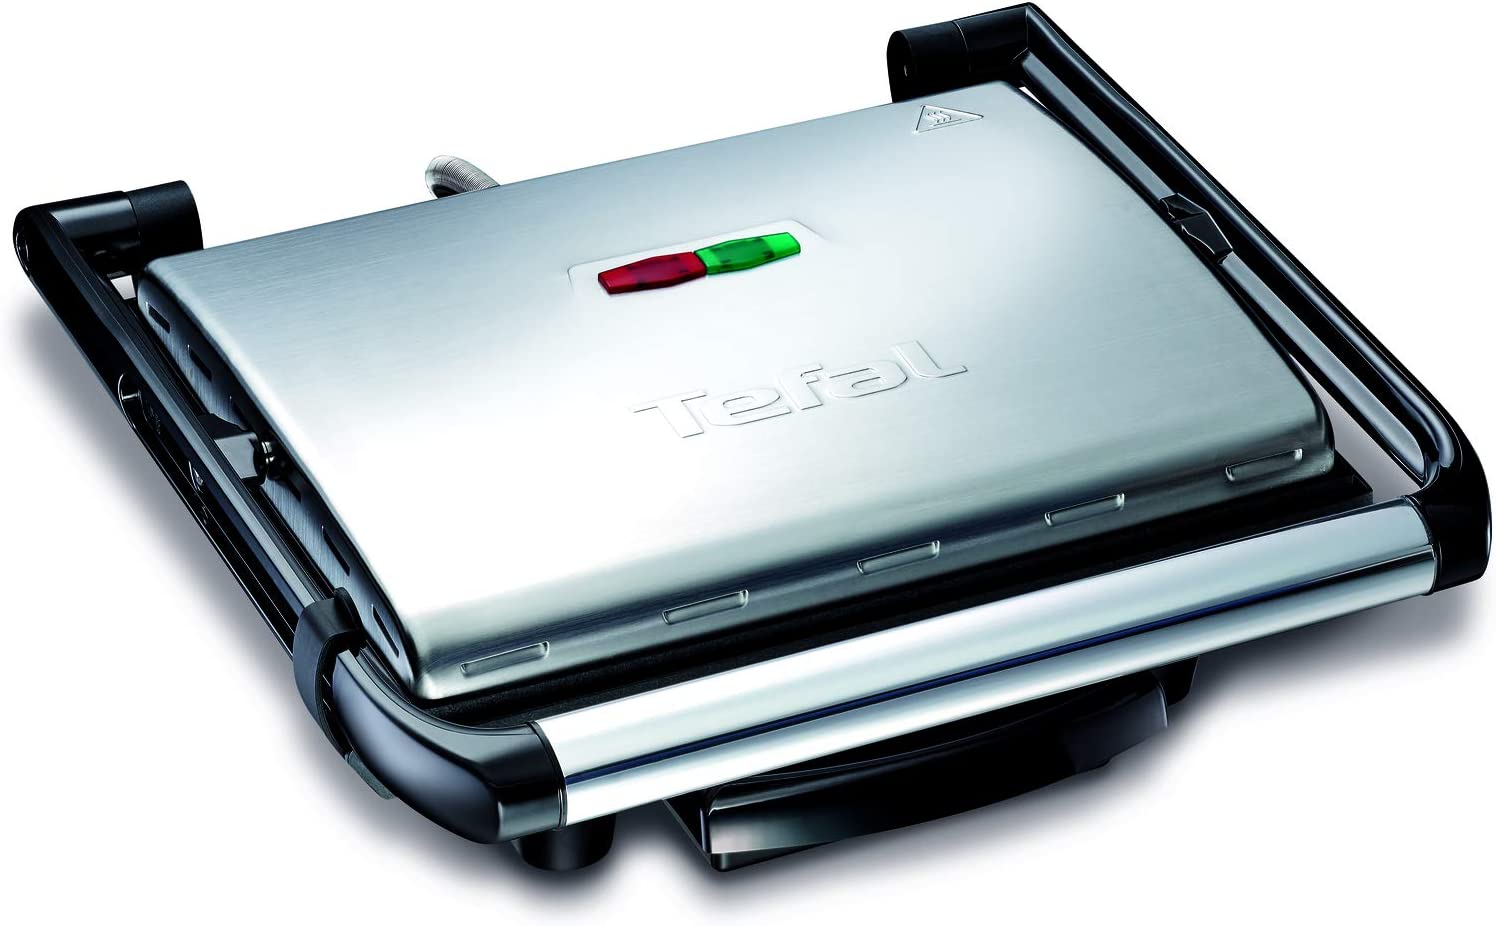 Tefal Grill, Inicio multi-functional grill, 2000 watts, GC241D2